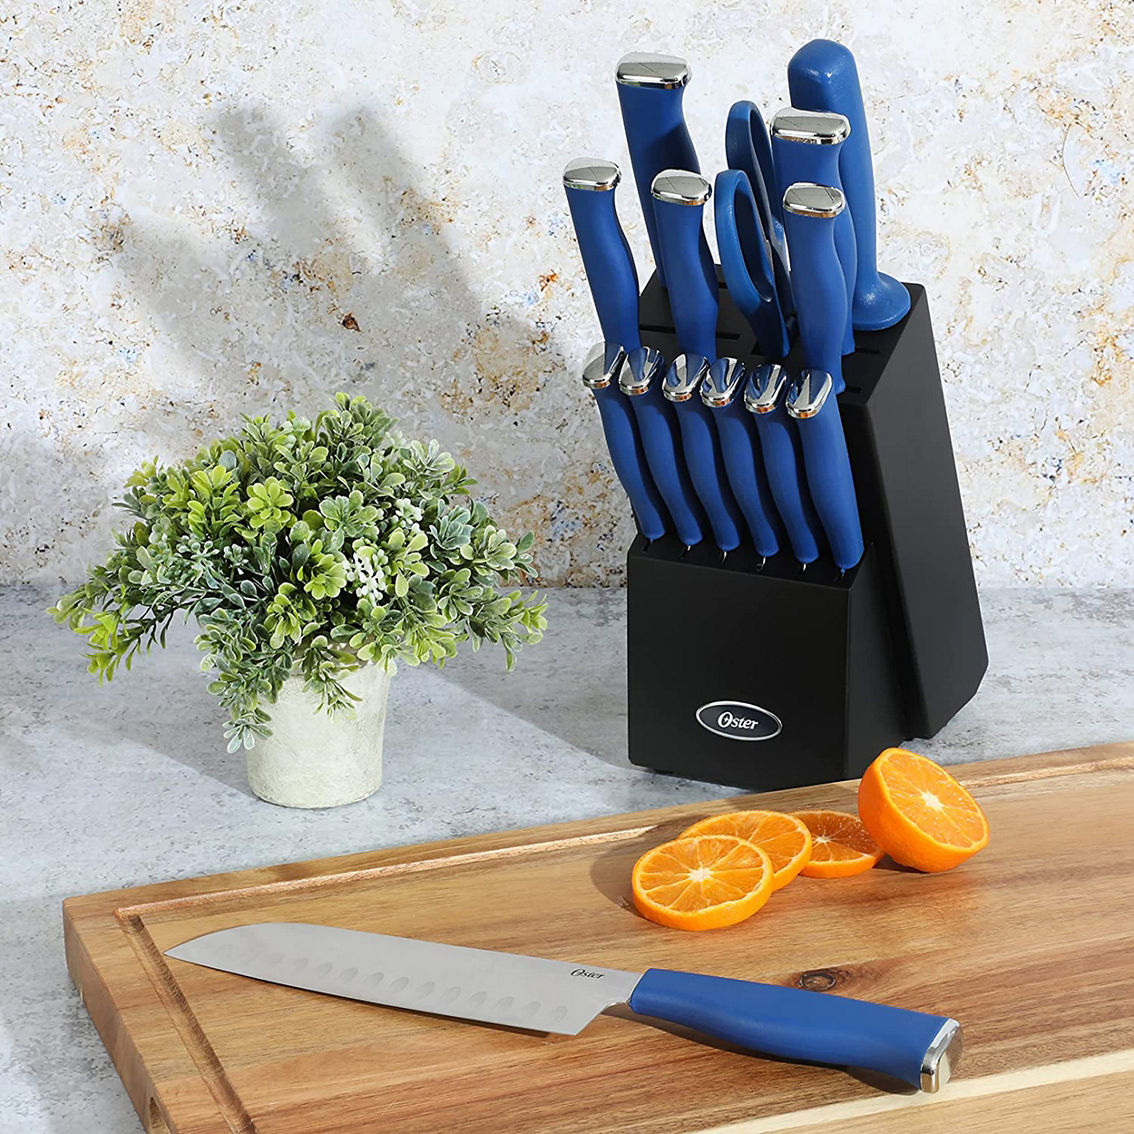 Oster Langmore 15 Piece Stainless Steel Blade Cutlery Set in Dark Blue - Image 5 of 5